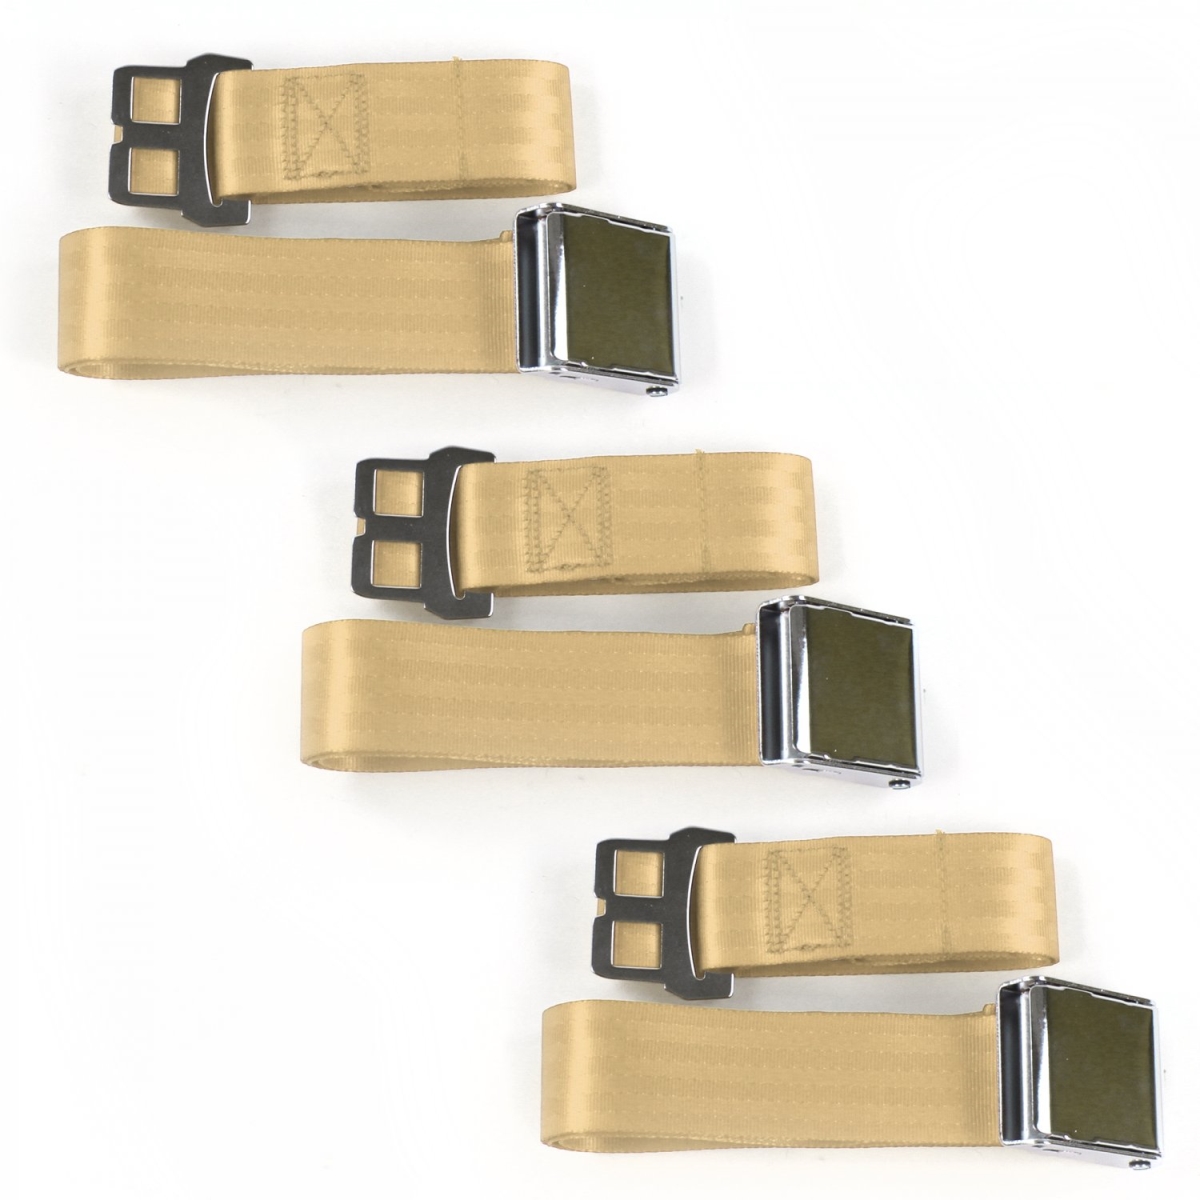 661947 Airplane 2 Point Tan Lap Bench Seat Belt Kit for Chevy Truck 1967-1972 - 3 Belts -  safeTboy